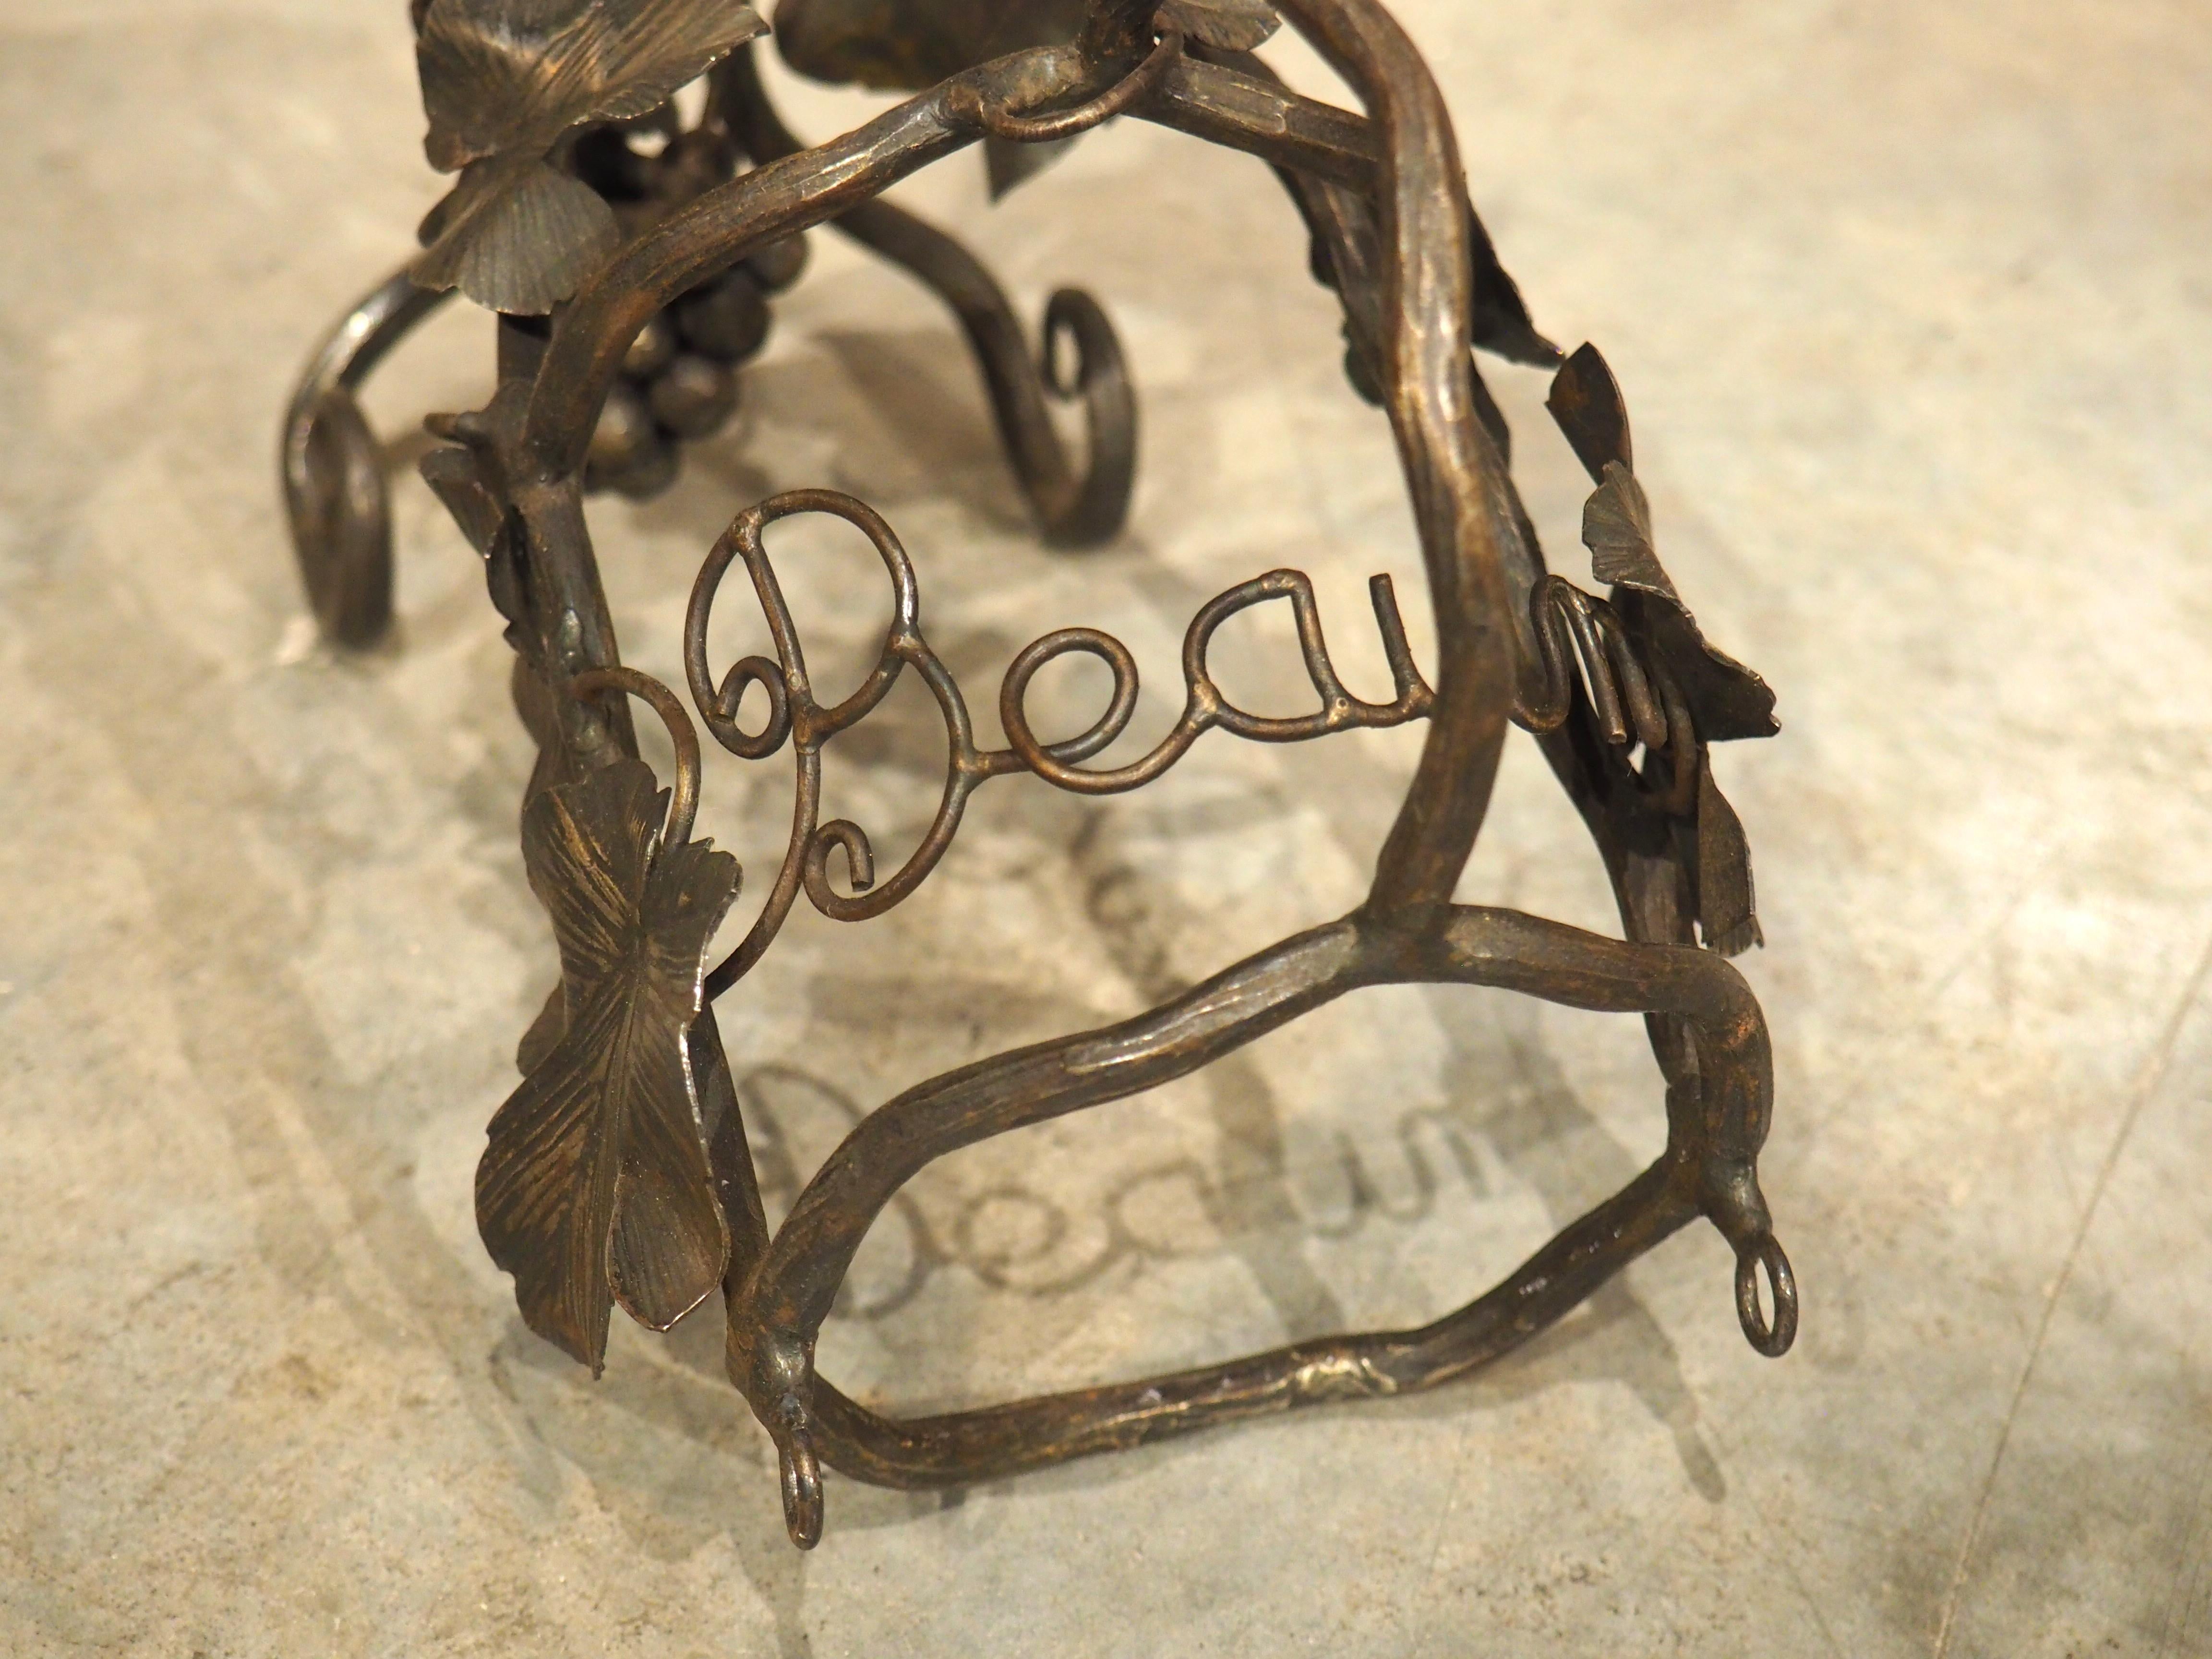 A charming wrought iron wine bottle holder from Beaune, France, circa 1900, this wine accessory features realistically crafted grape bunches, complete with sprawling vines. A pair of volute scrolled feet in the front flank a hanging grape cluster,